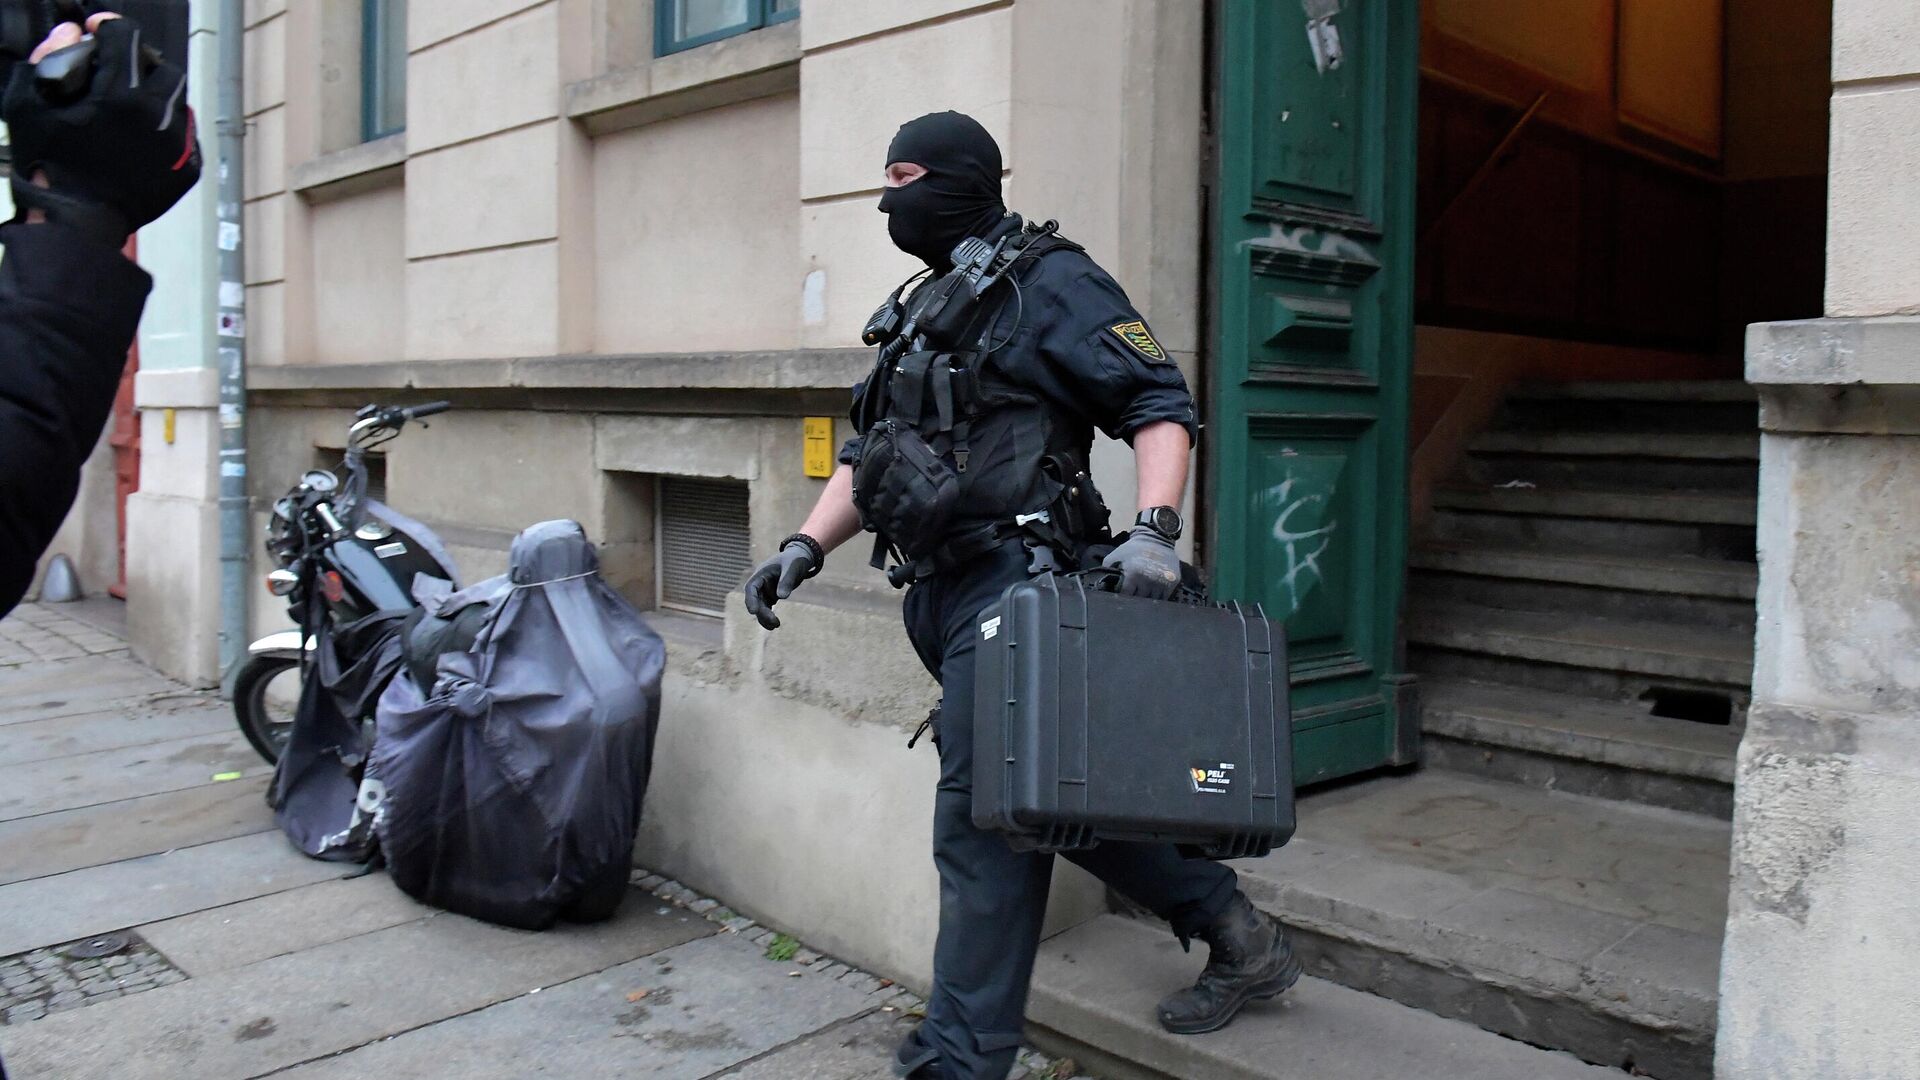 Police leaves a building during raids in several locations in Dresden, Germany, December 15, 2021, as part of an investigation into what they said was a plot to murder the state's prime minister, Michael Kretschmer, by anti-vaccination activists - Sputnik International, 1920, 15.12.2021